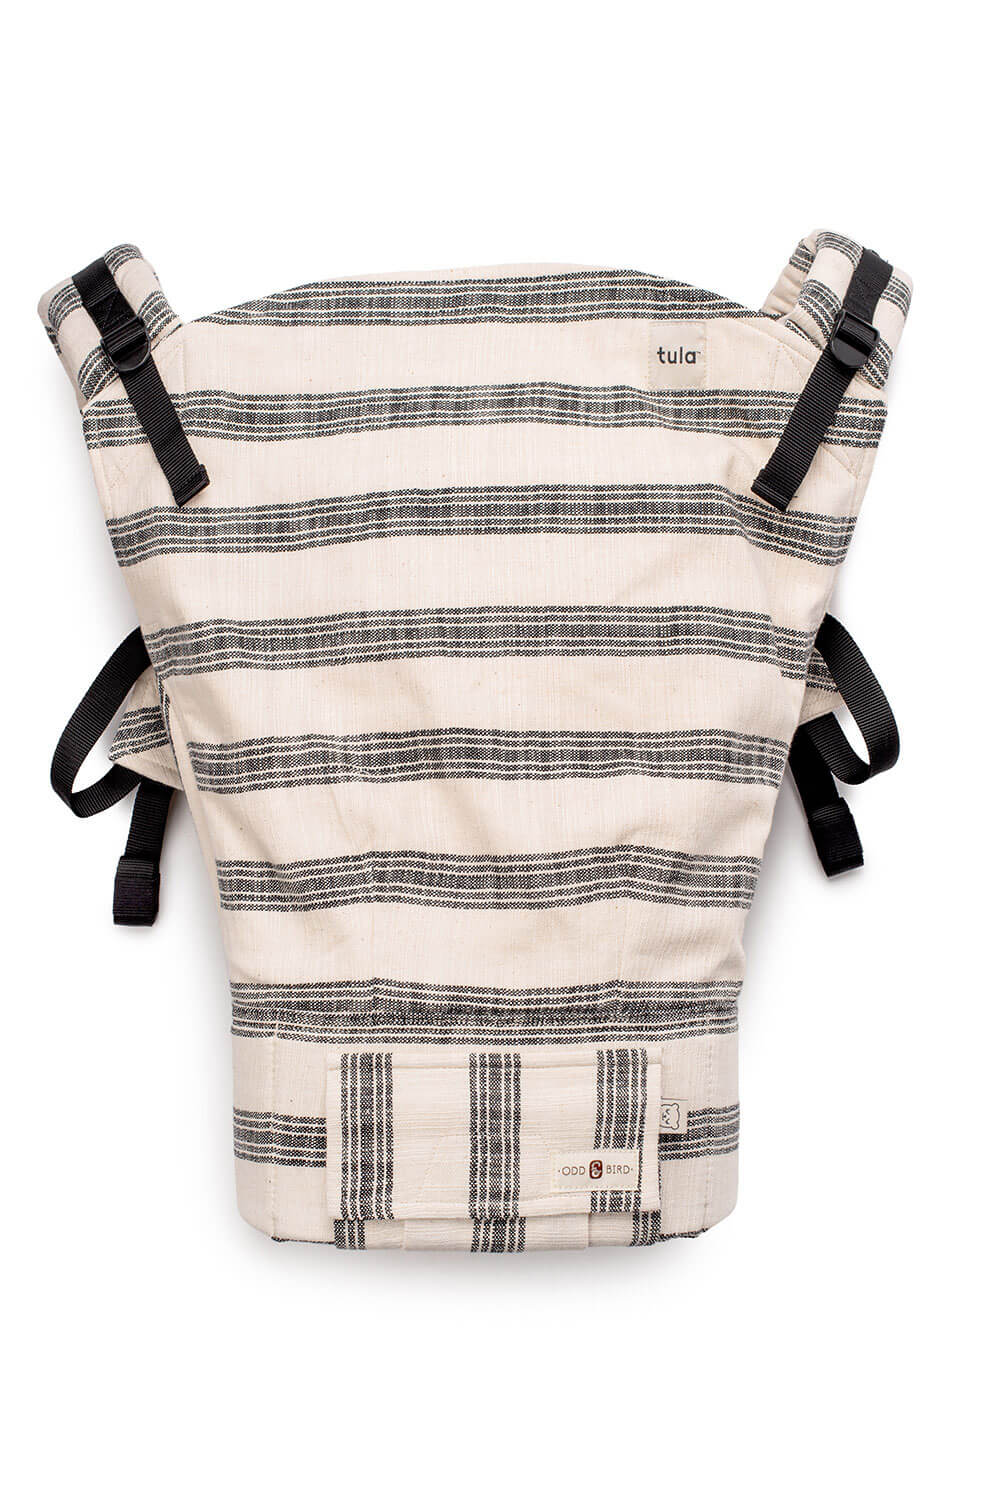 Sultan - Signature Woven Toddler Carrier